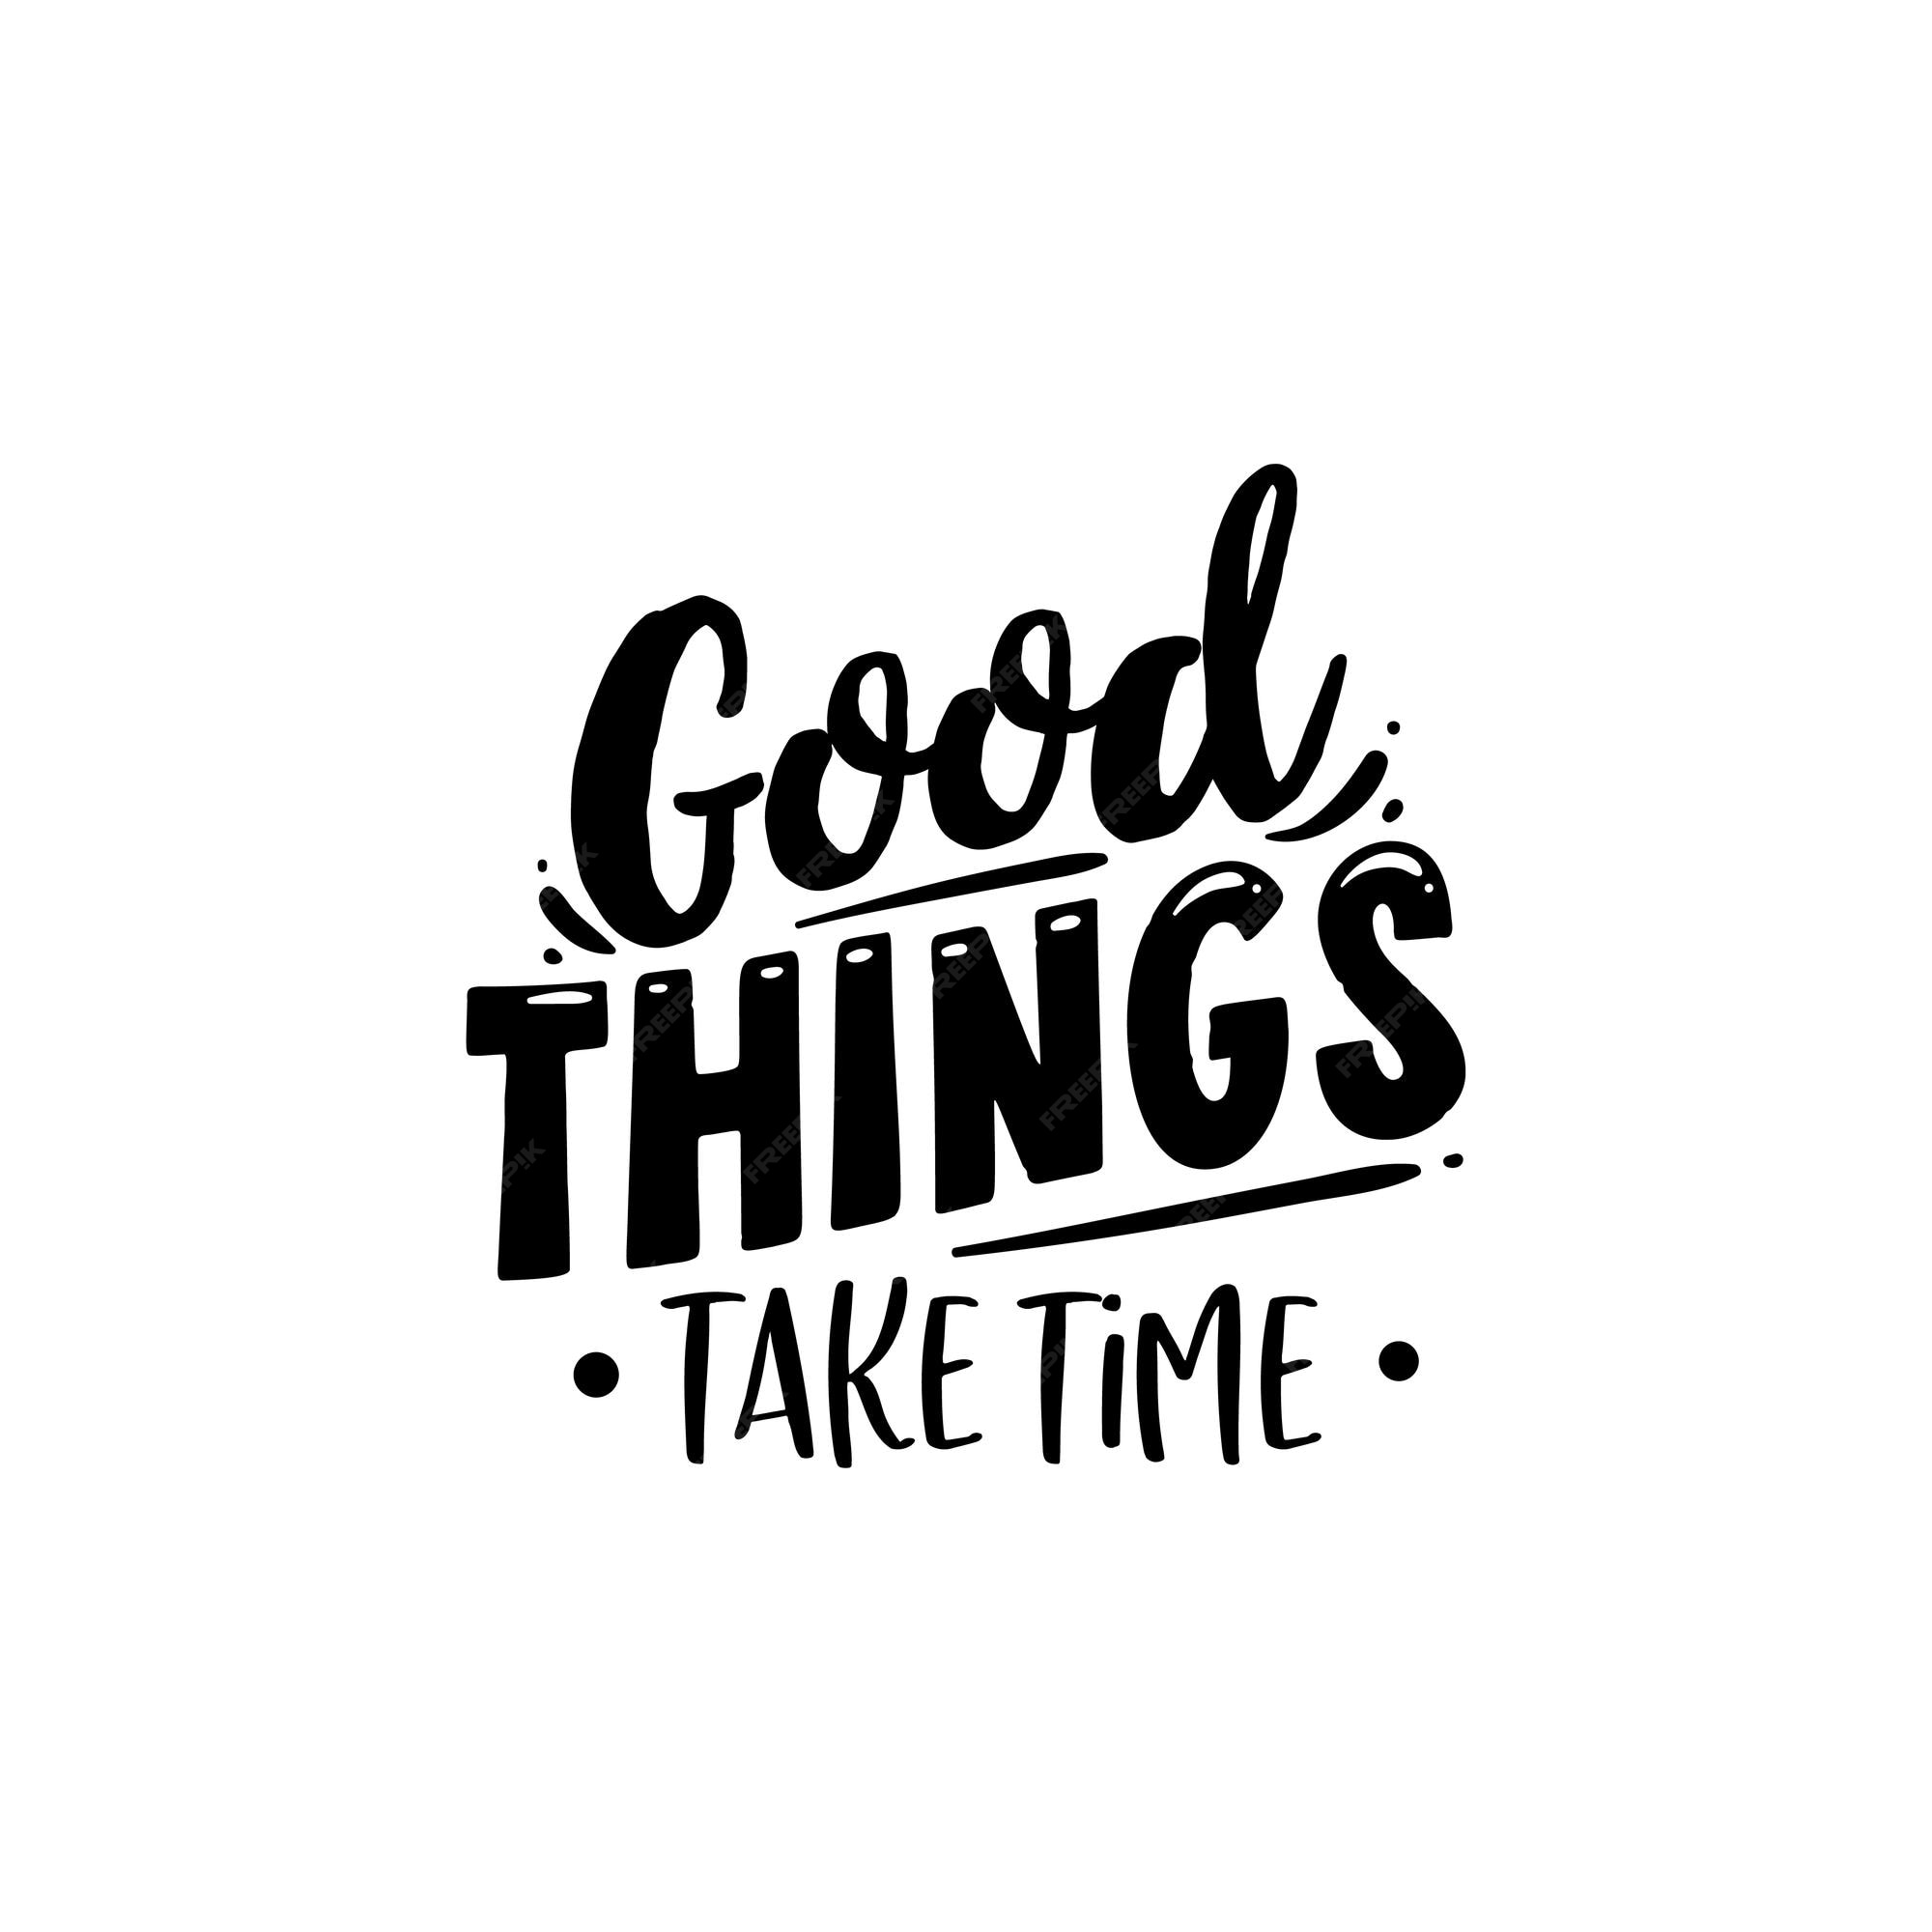 Premium | Good take time quotes lettering for tshirt design